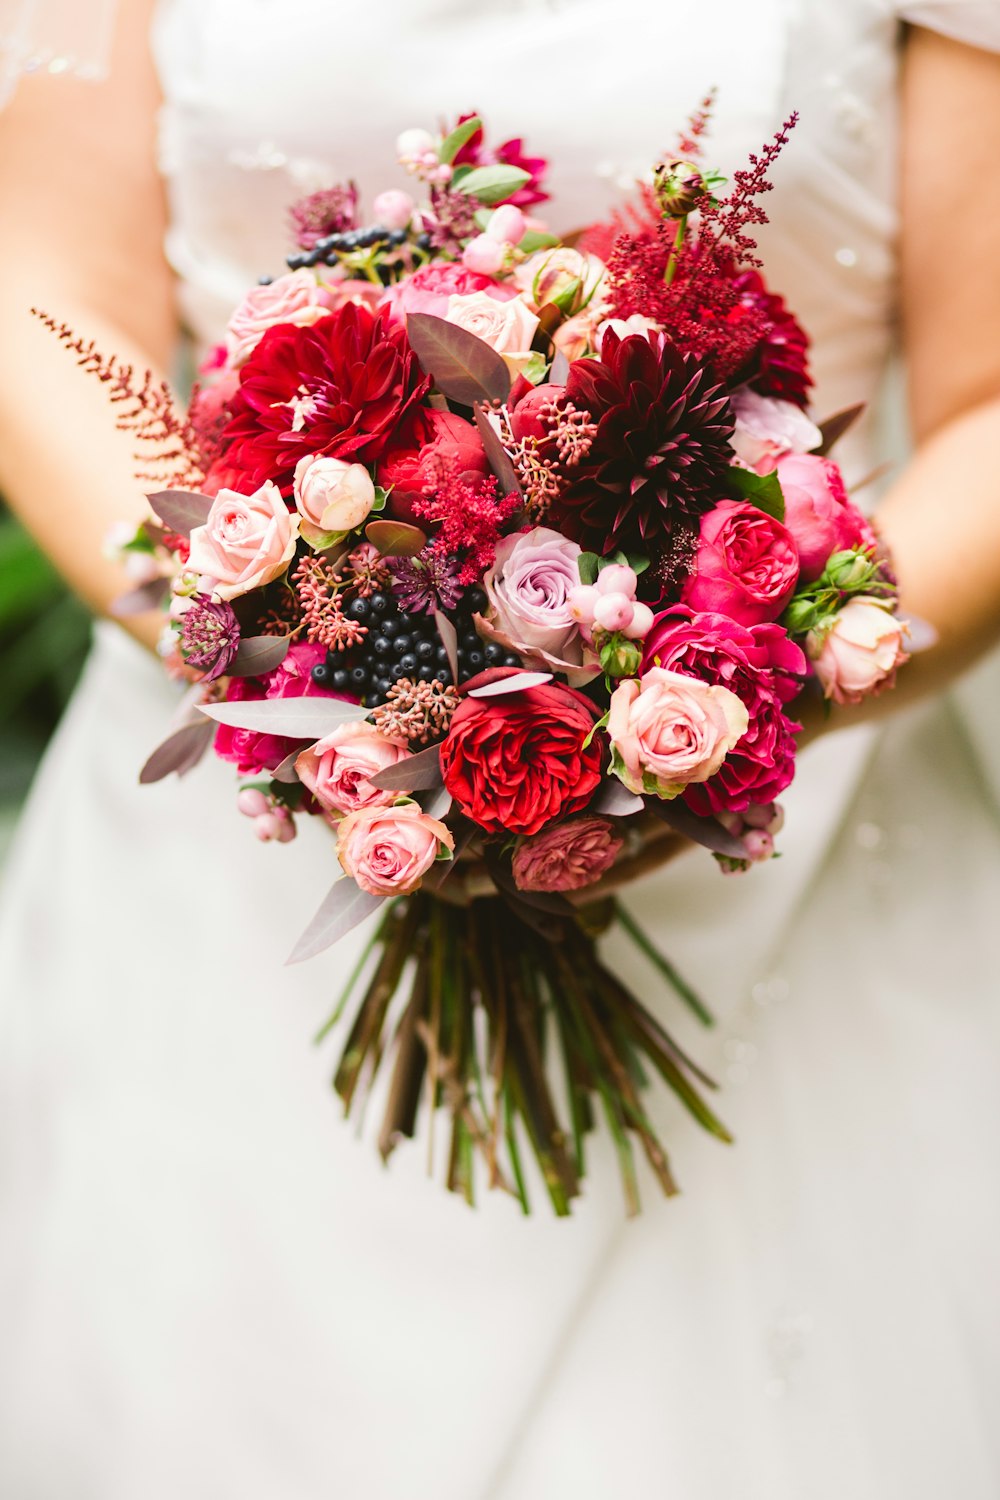 750+ Wedding Bouquet Pictures | Download Free Images on Unsplash